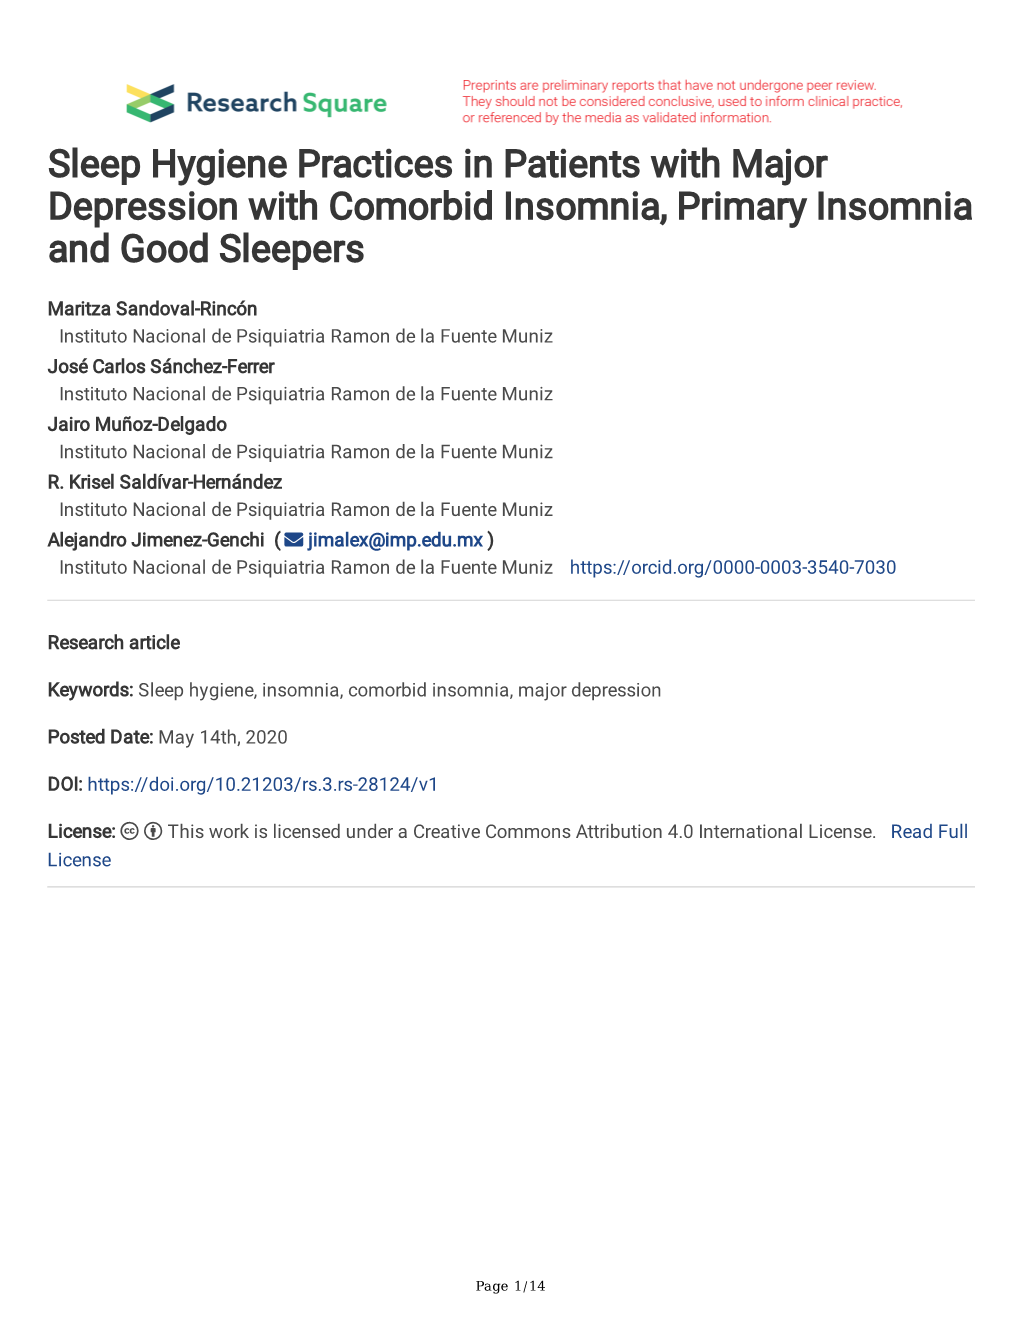 Sleep Hygiene Practices in Patients with Major Depression with Comorbid Insomnia, Primary Insomnia and Good Sleepers